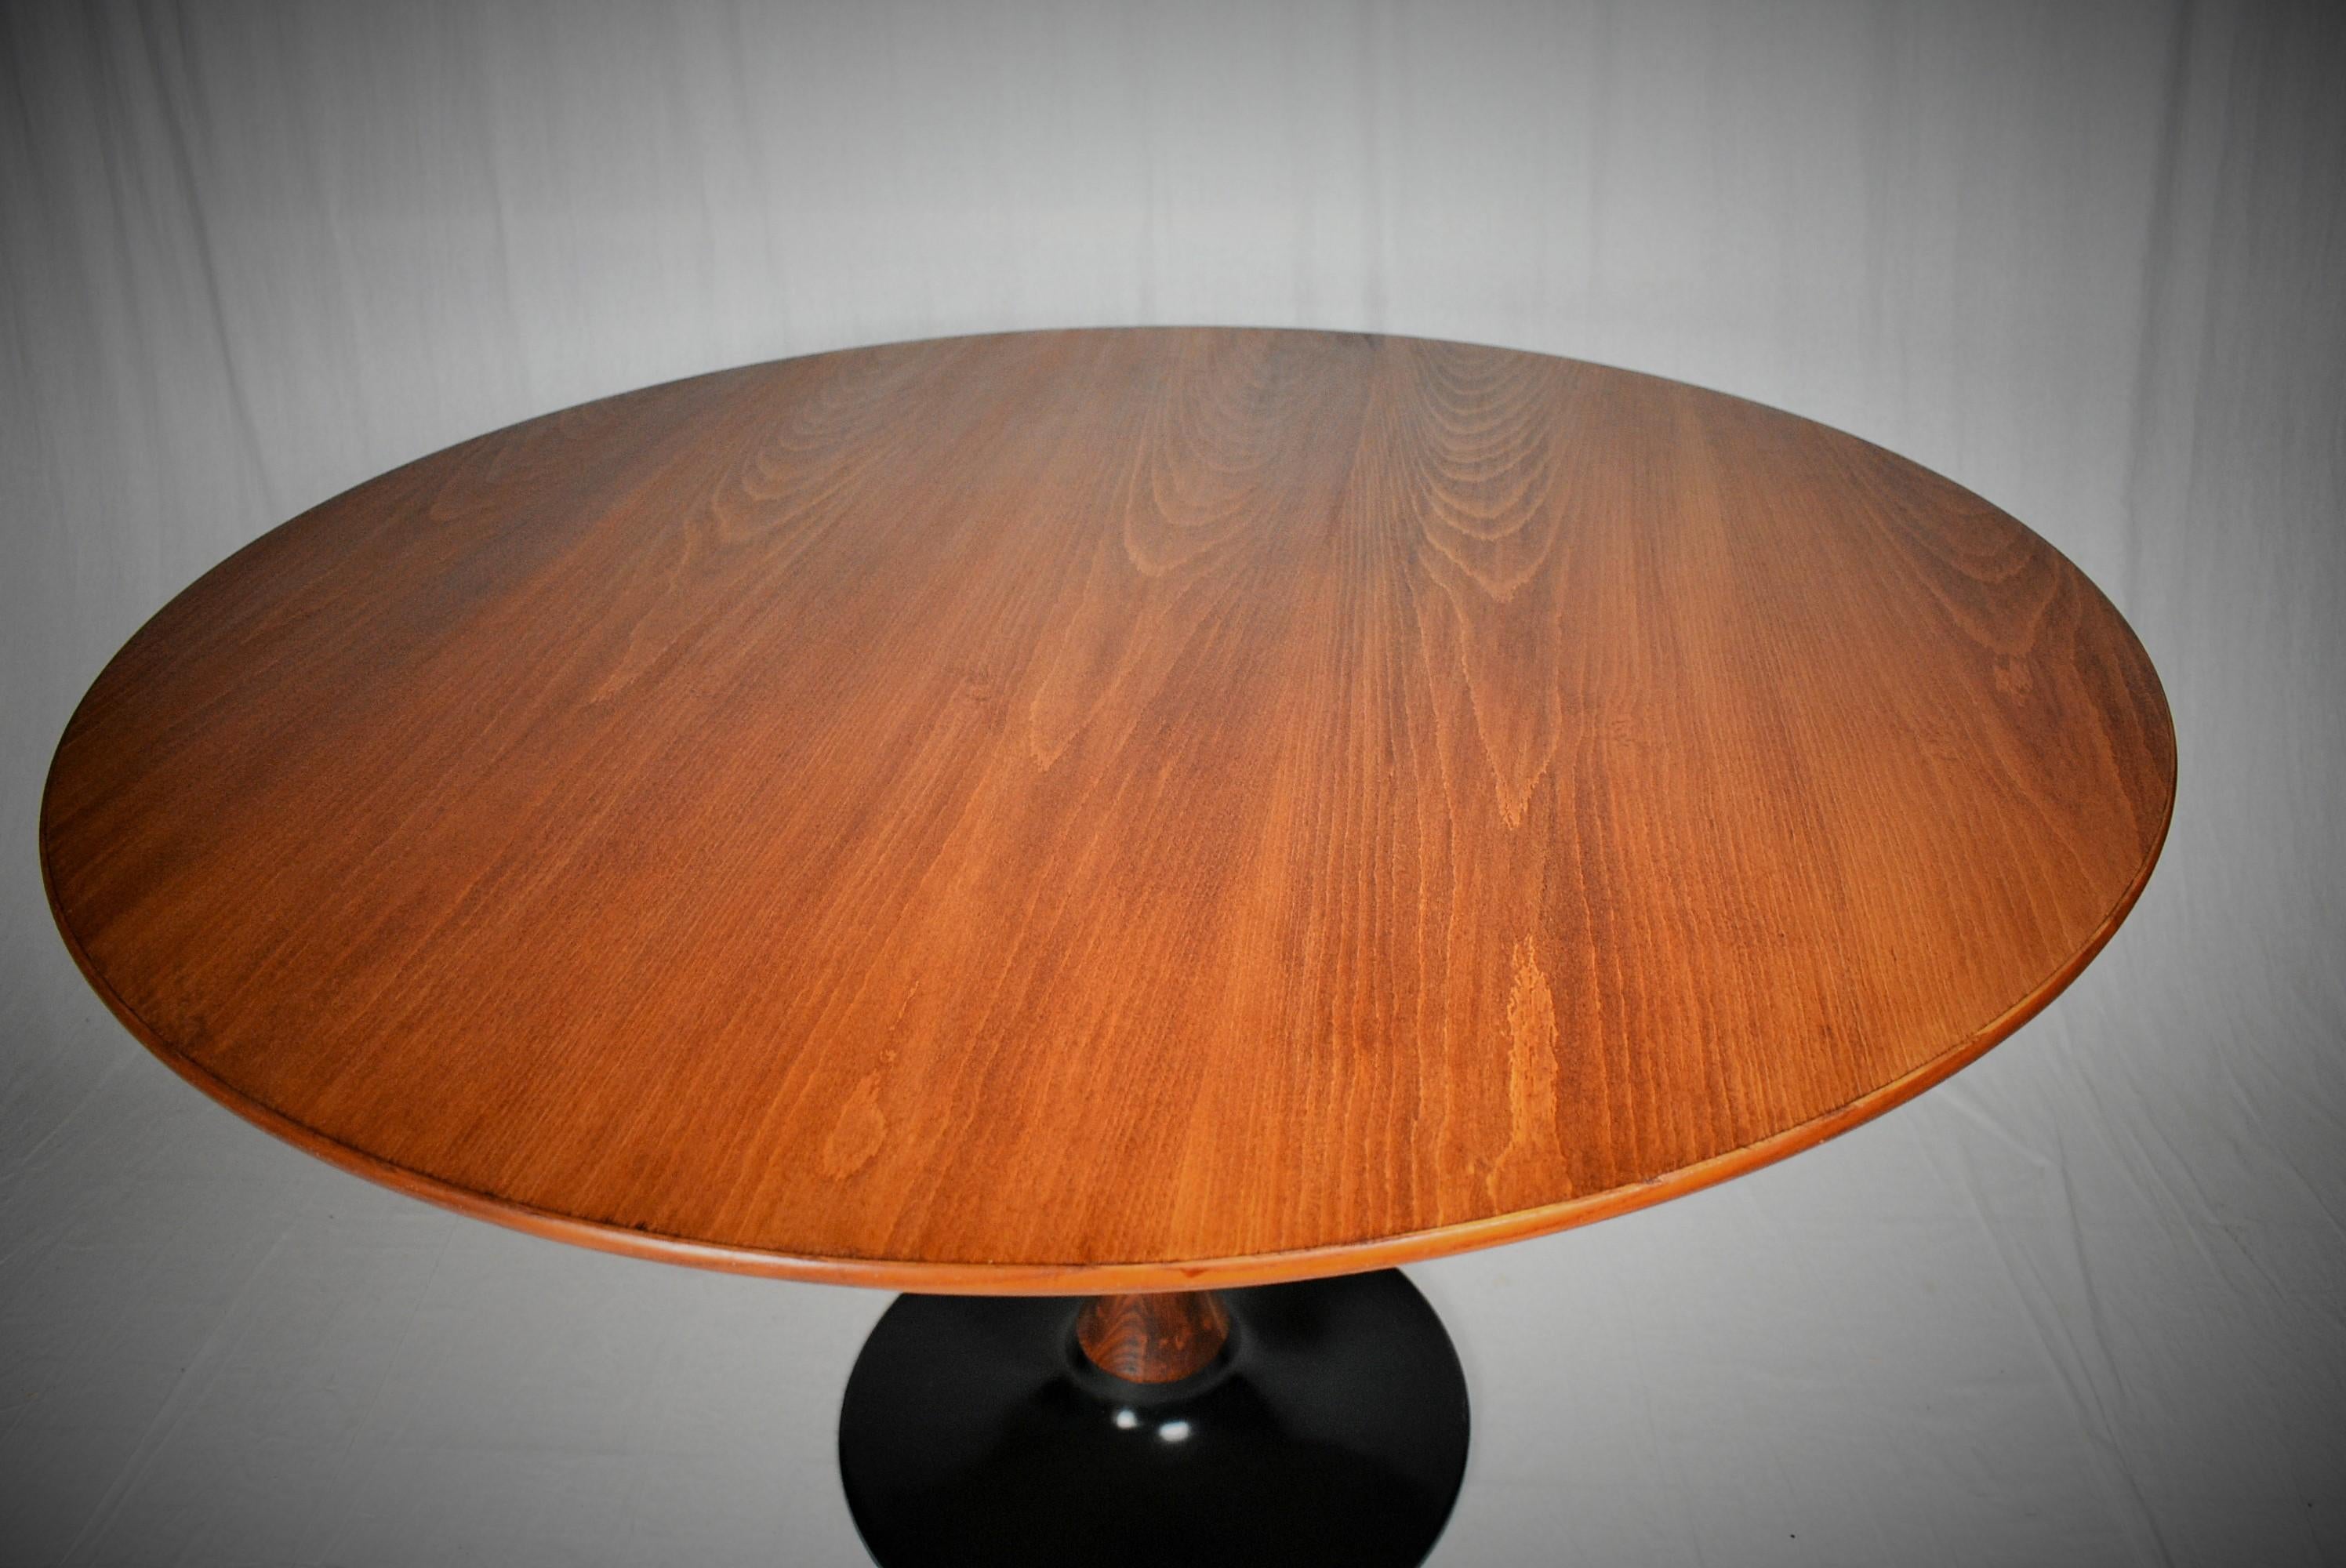 - Made in Czechoslovakia
- Made of beech, veneer
- The table is Stabil
- Good condition.